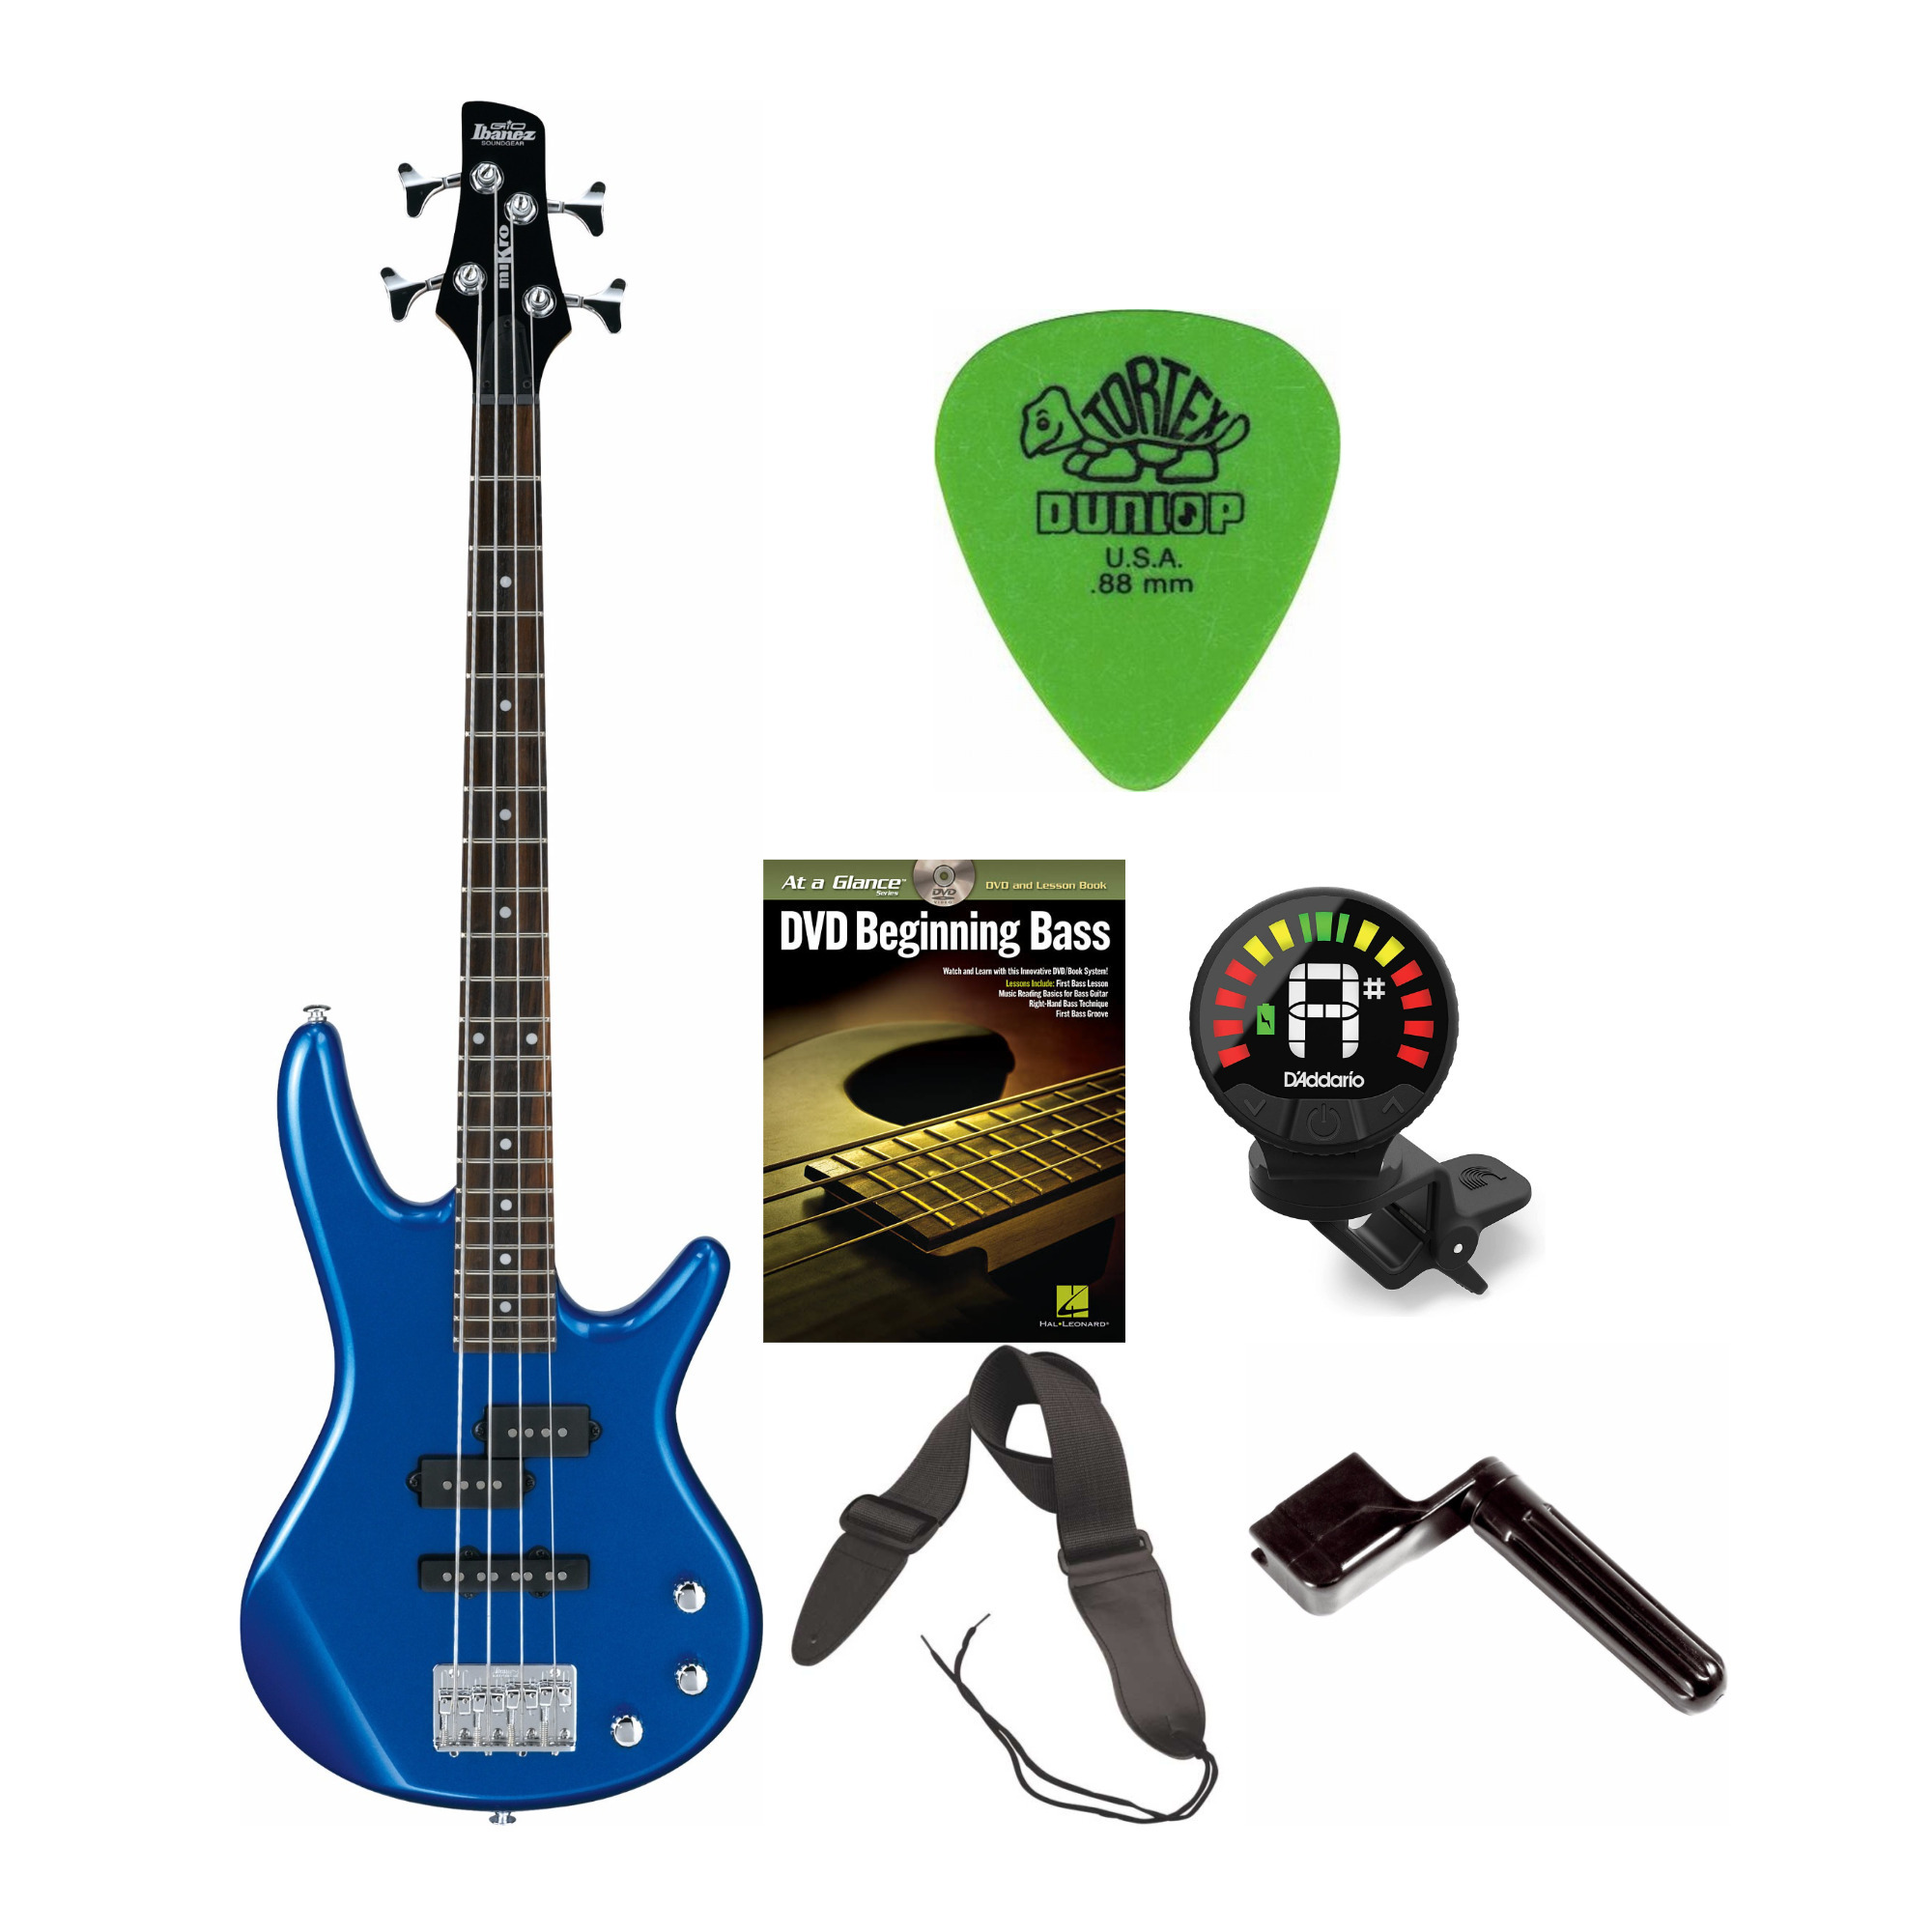 Ibanez GSRM20 Mikro Short-Scale Bass Guitar w/ Tuner & Accessory Kit in Blue -  GSRM20SLB